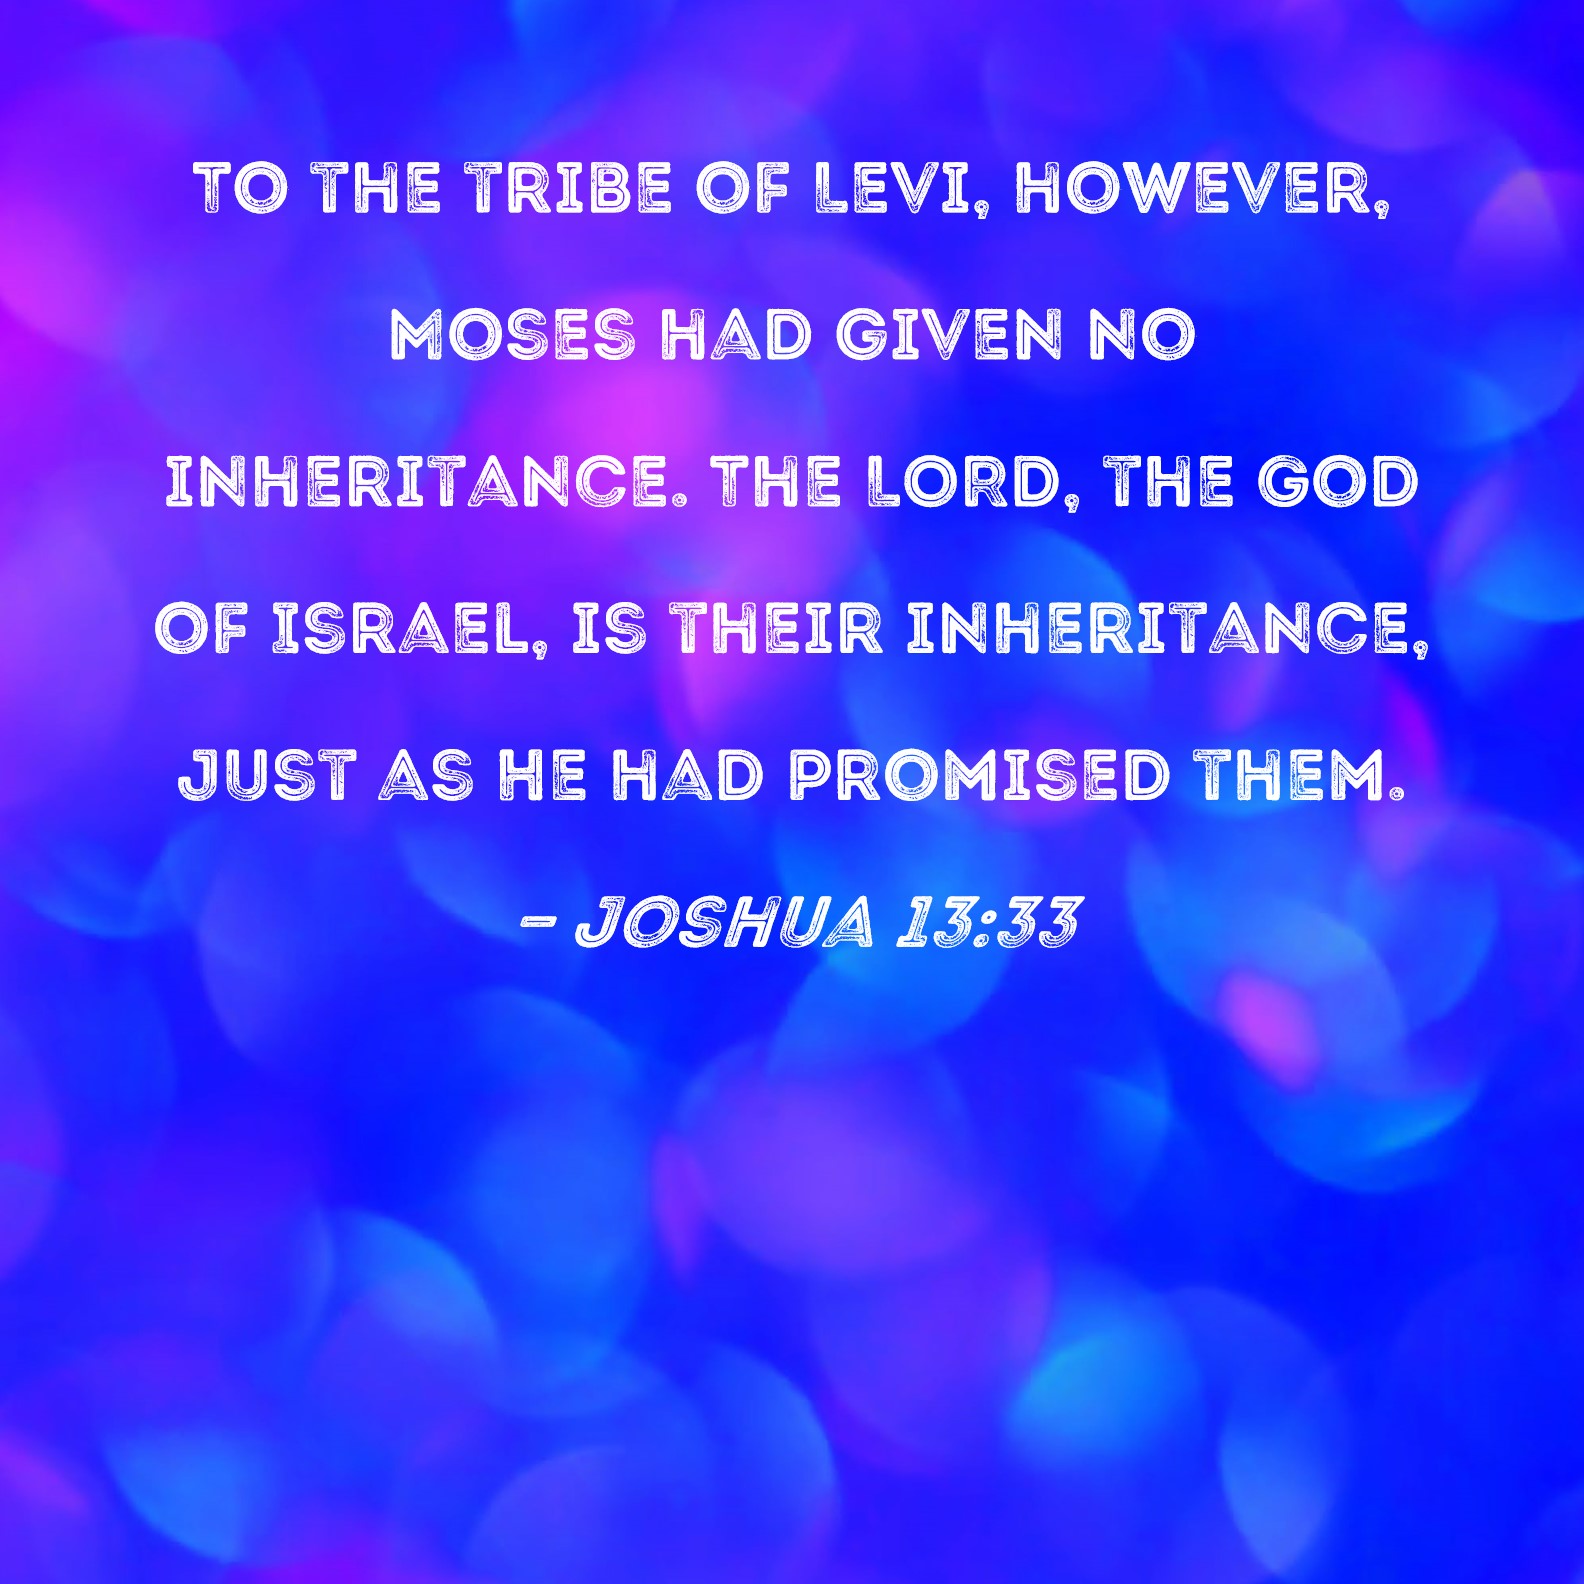 Joshua 13:33 To the tribe of Levi, however, Moses had given inheritance. The LORD, God of Israel, is their just as He had promised them.